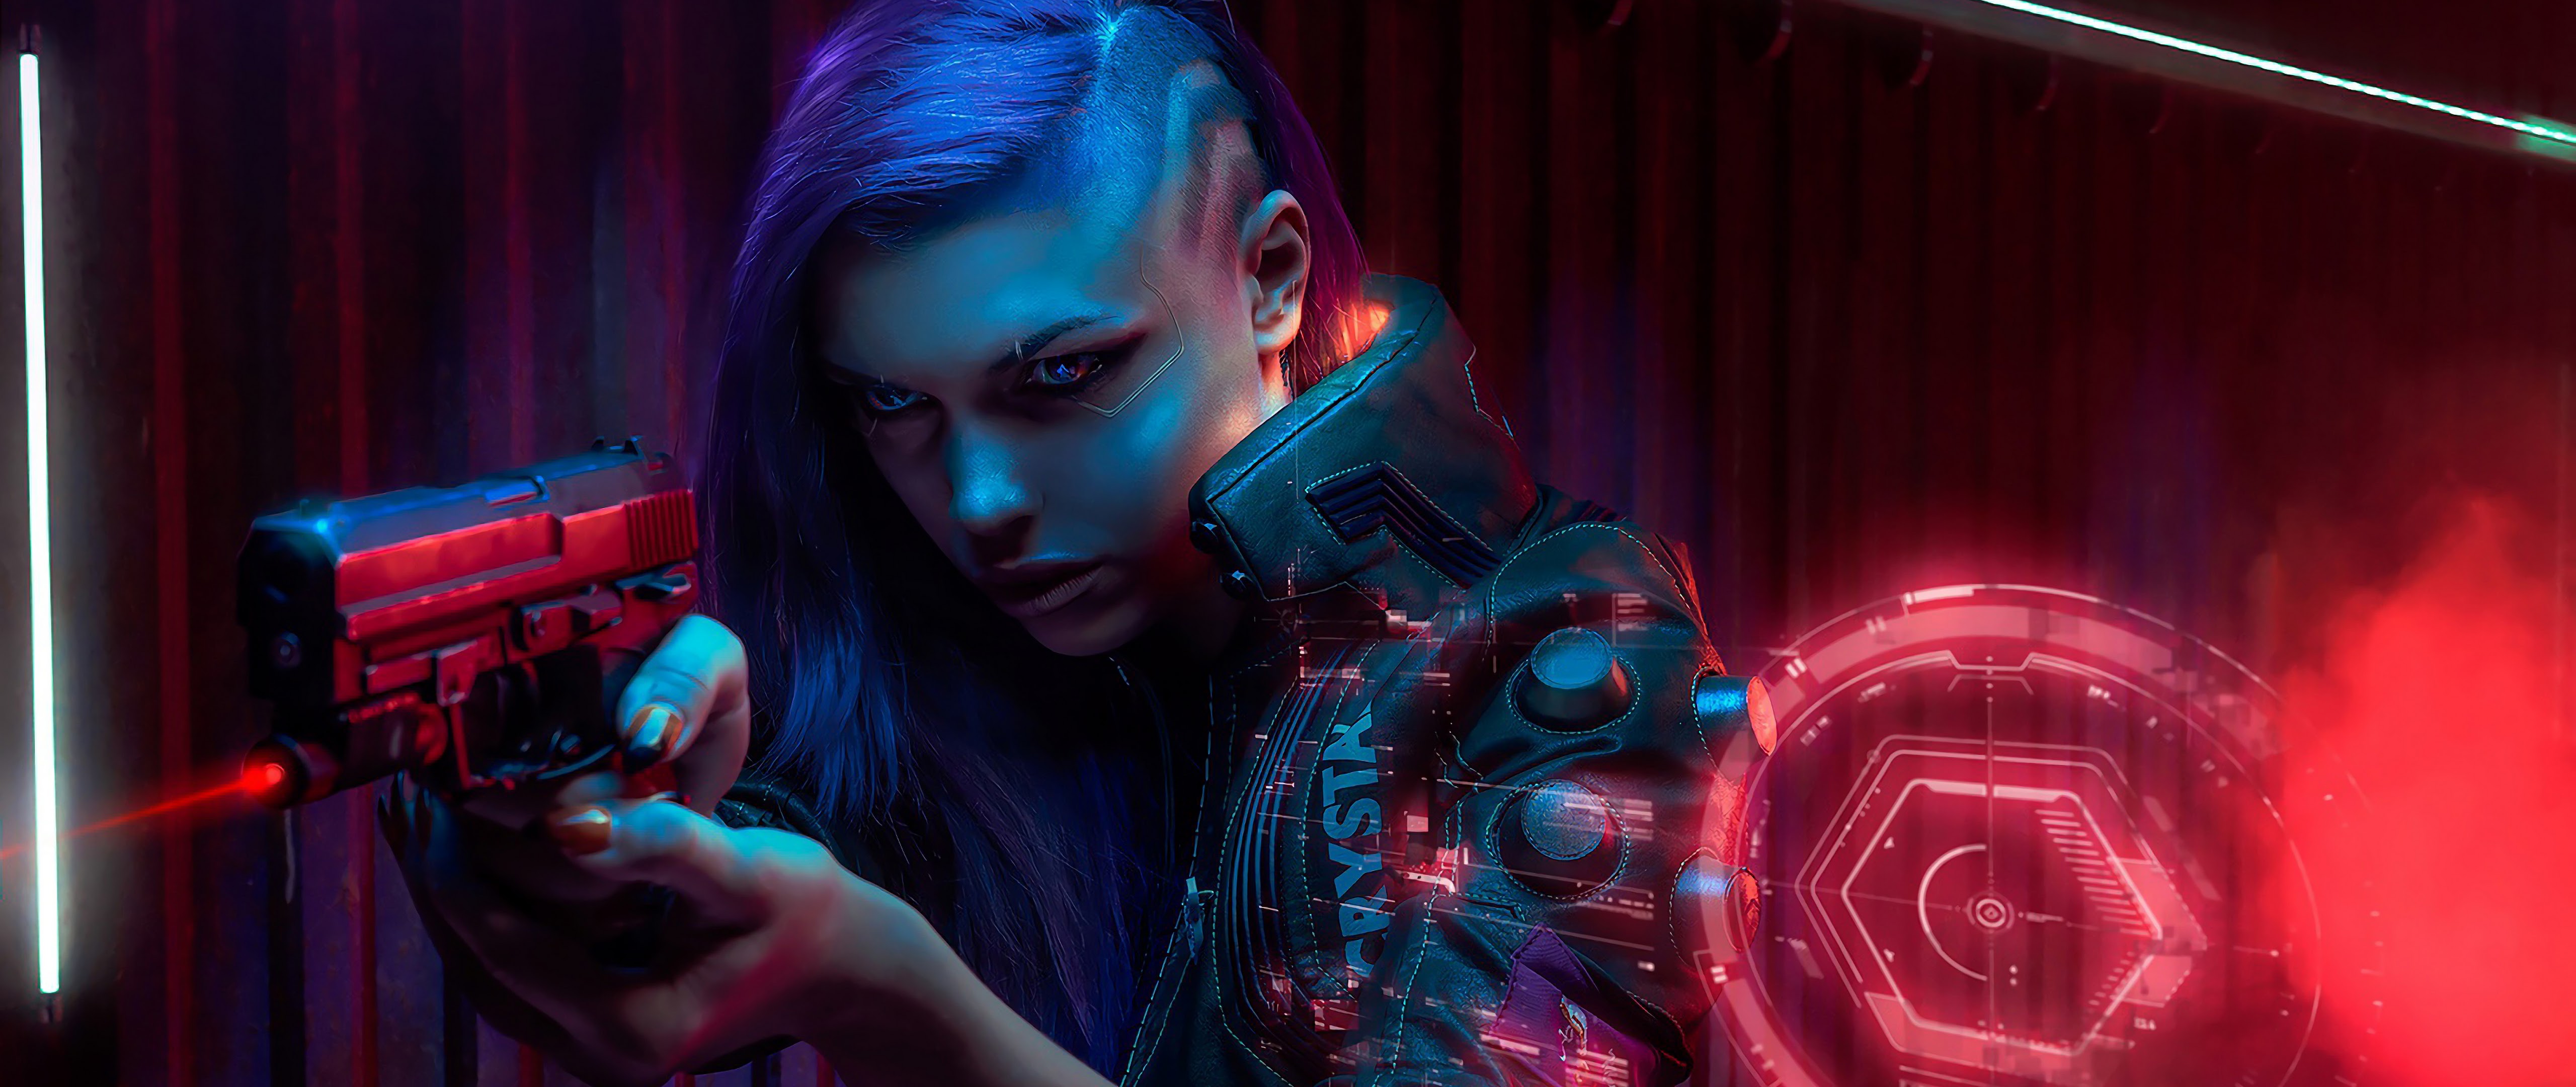 This is actually a post or even photo around the Cyberpunk 2077 V Female Co...